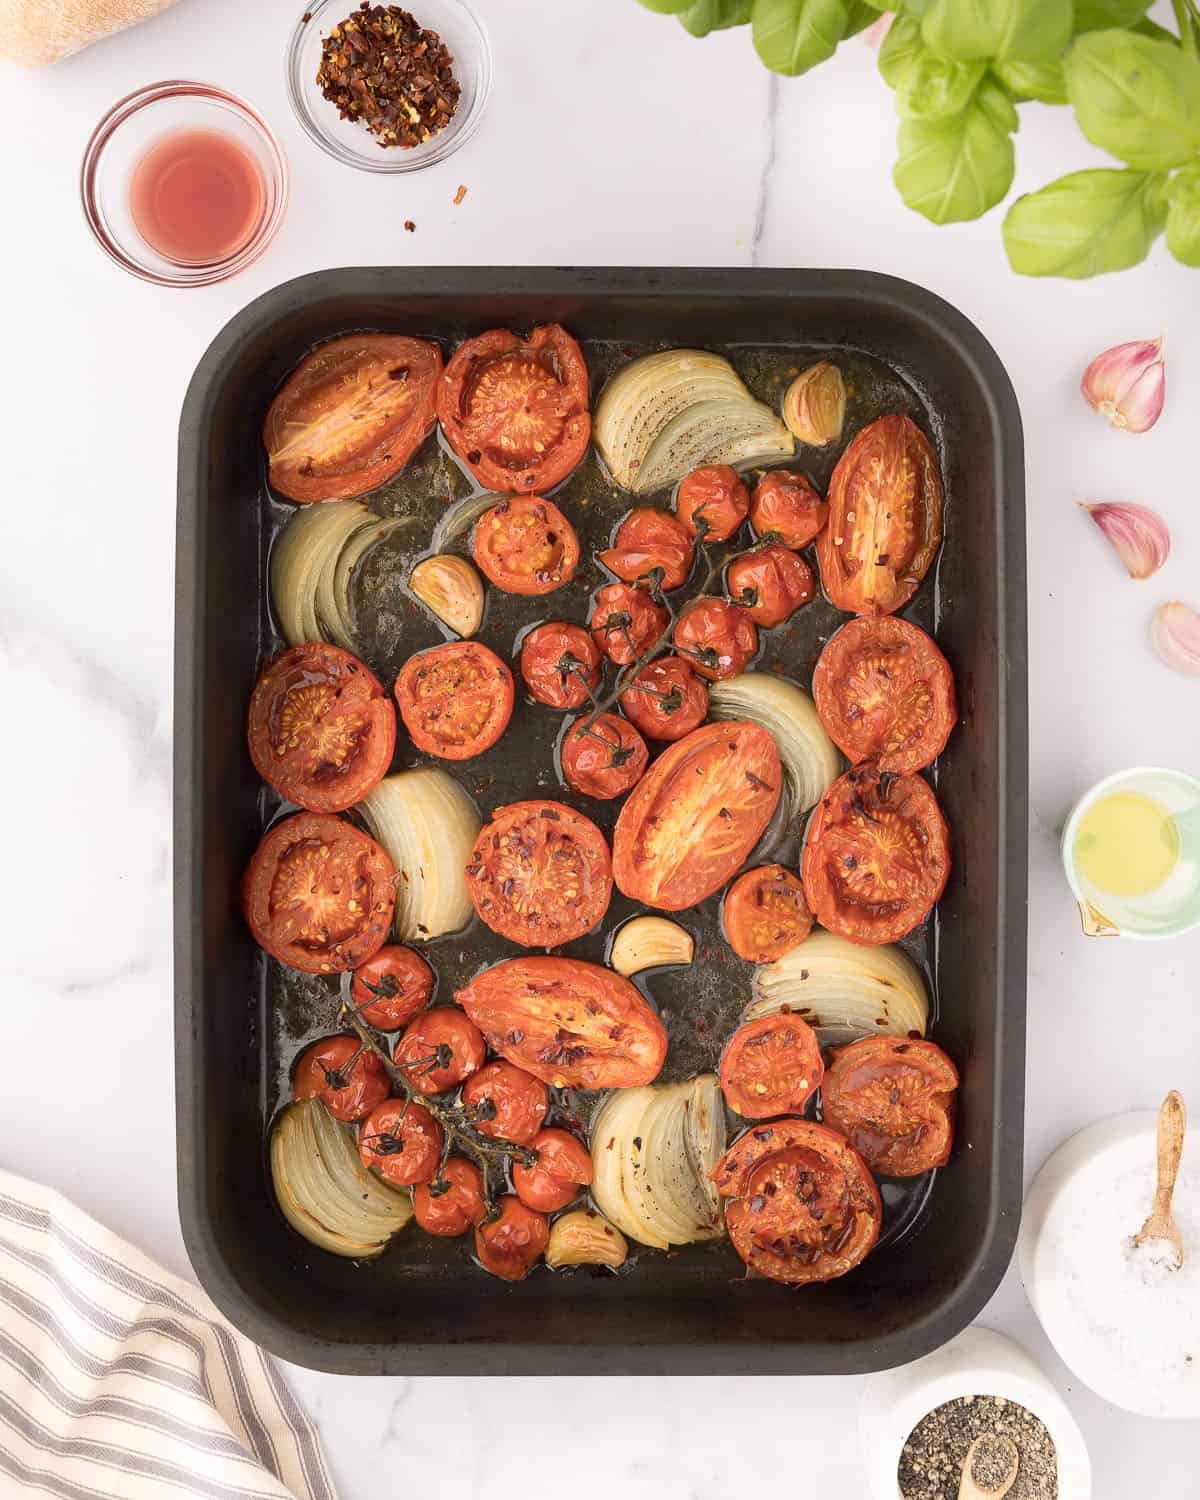 Roasted tomatoes, onion wedges, and garlic cloves in a pan, with other ingredients surrounding in small bowls, top view.